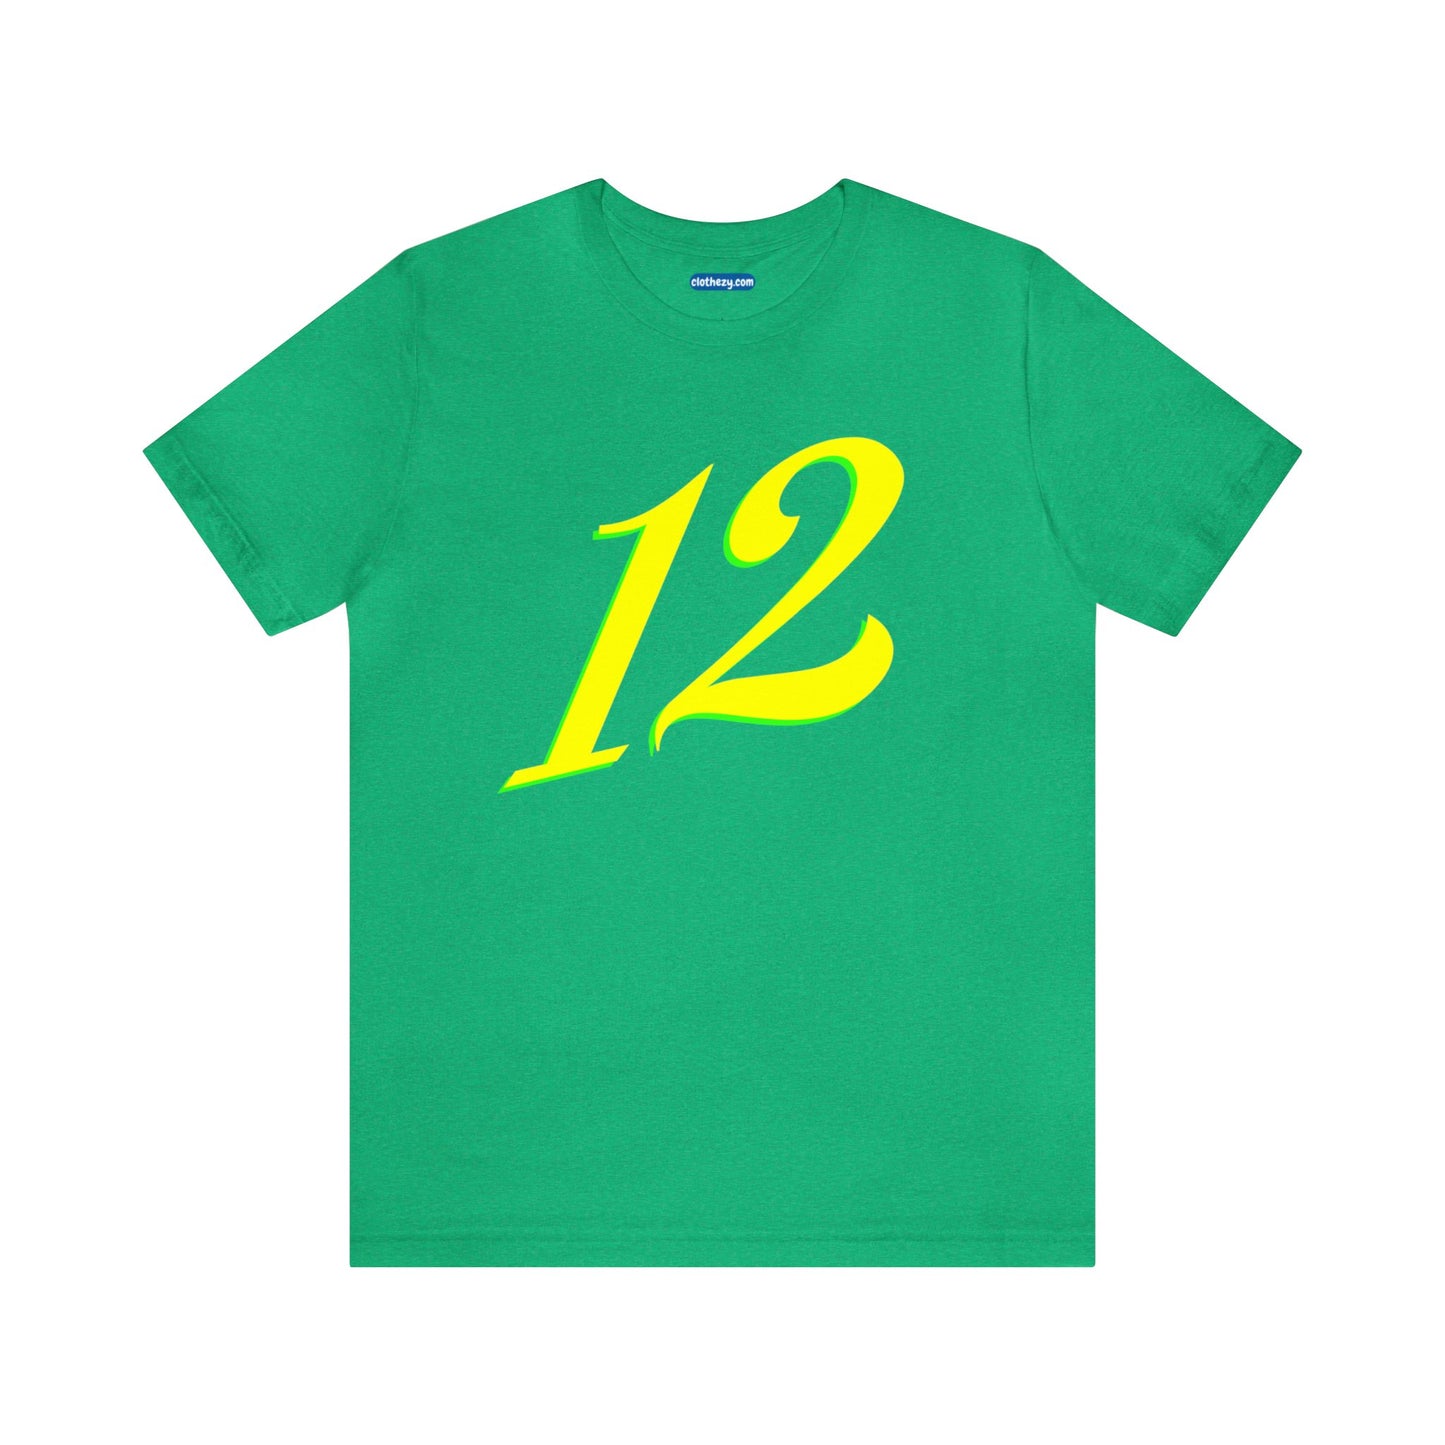 Number 12 Design - Soft Cotton Tee for birthdays and celebrations, Gift for friends and family, Multiple Options by clothezy.com in Royal Blue Heather Size Small - Buy Now